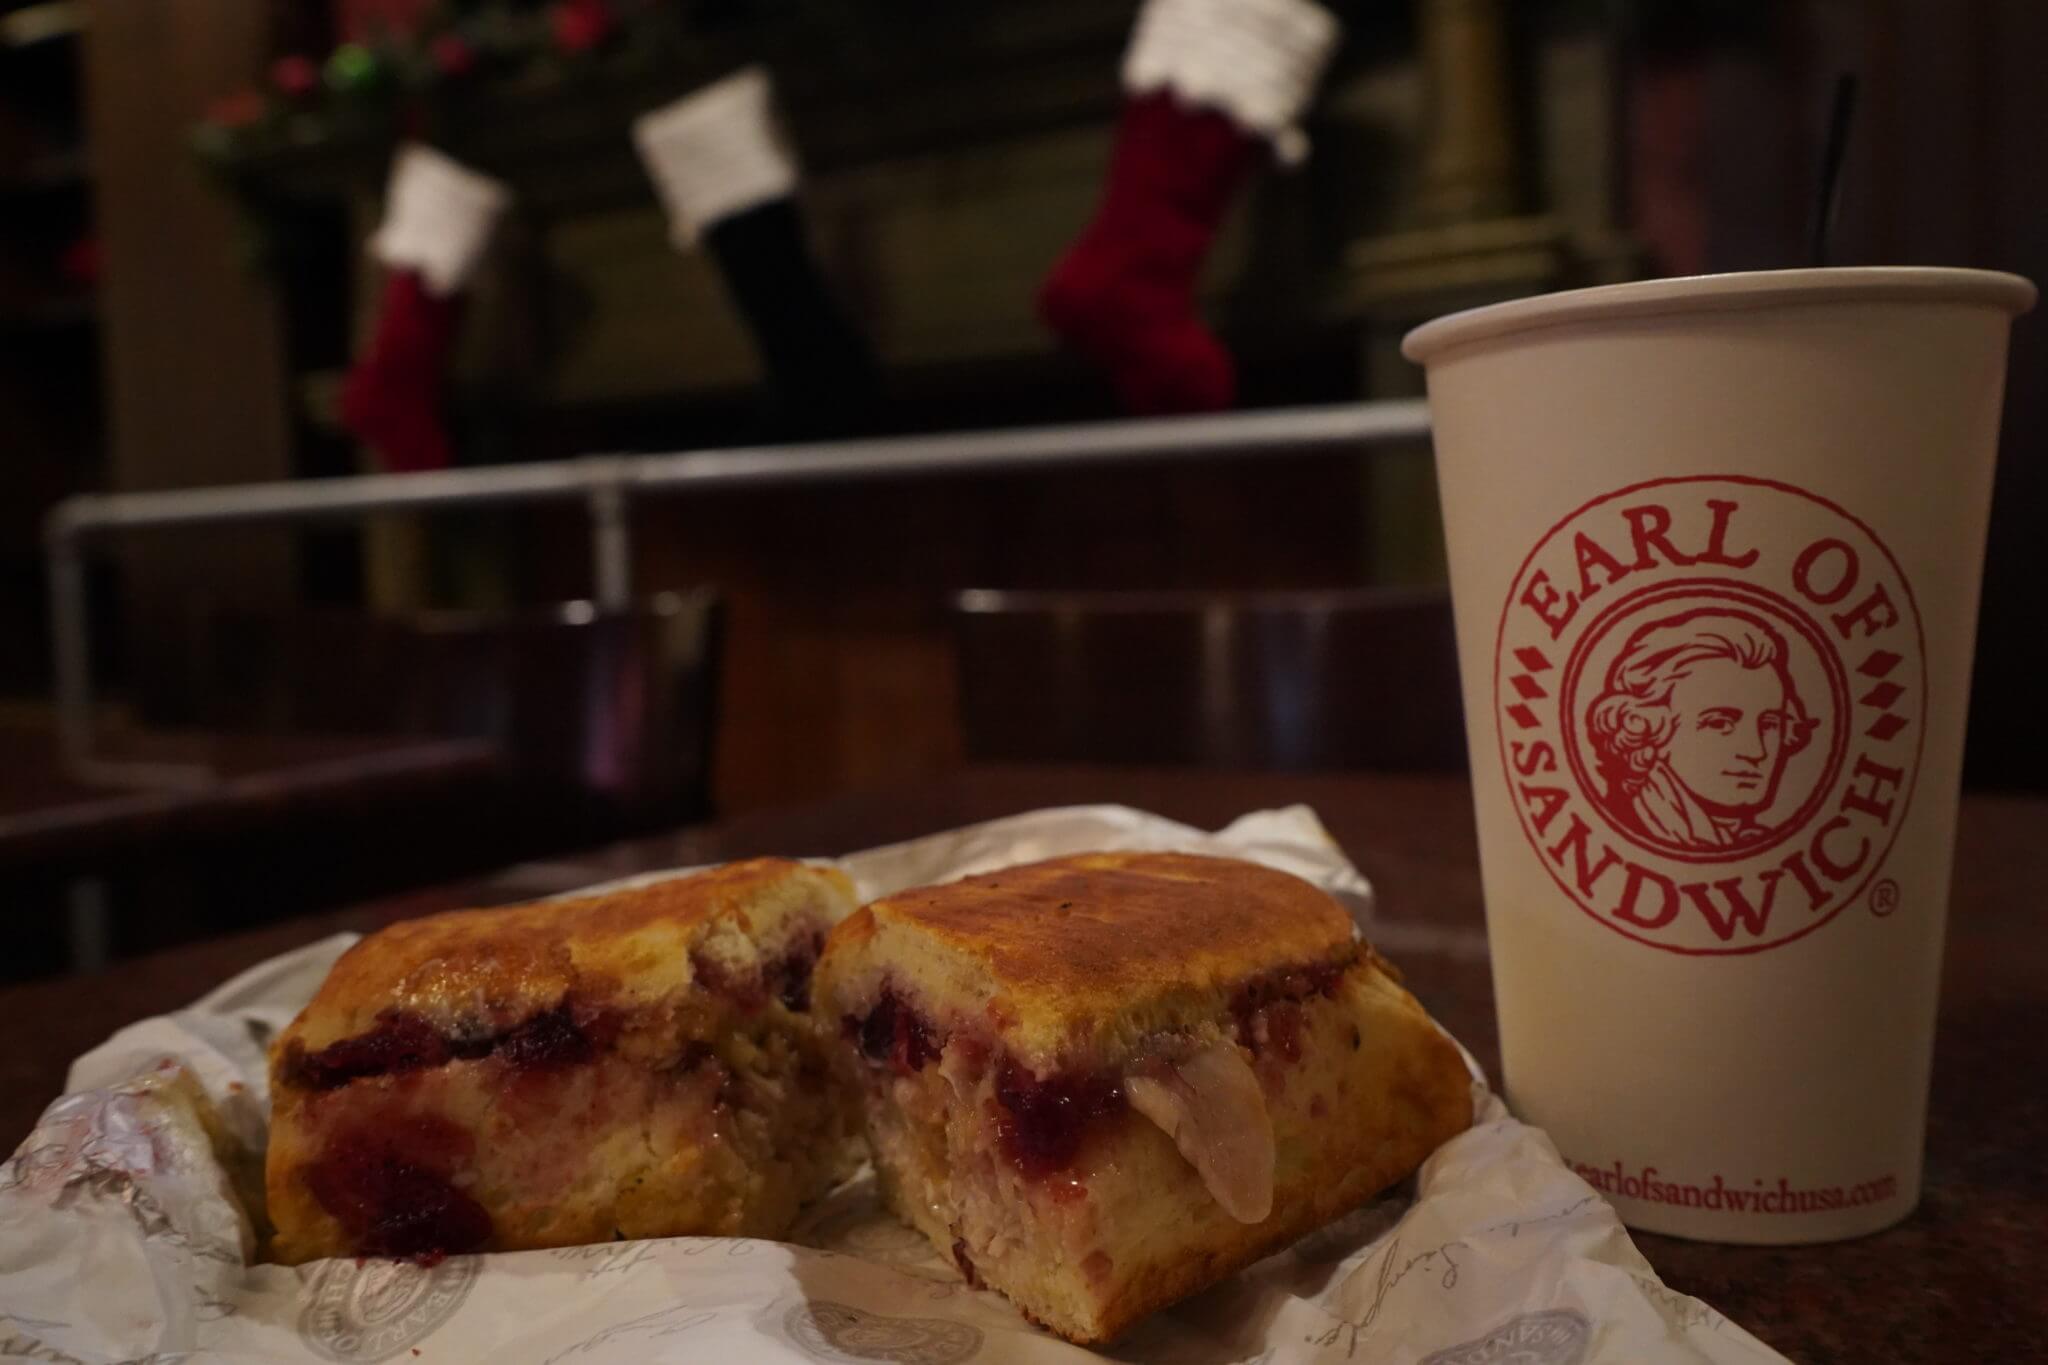 Holiday Turkey Sandwich with Stuffing and Cranberries and Coffee from Earl of Sandwich at Disney Springs